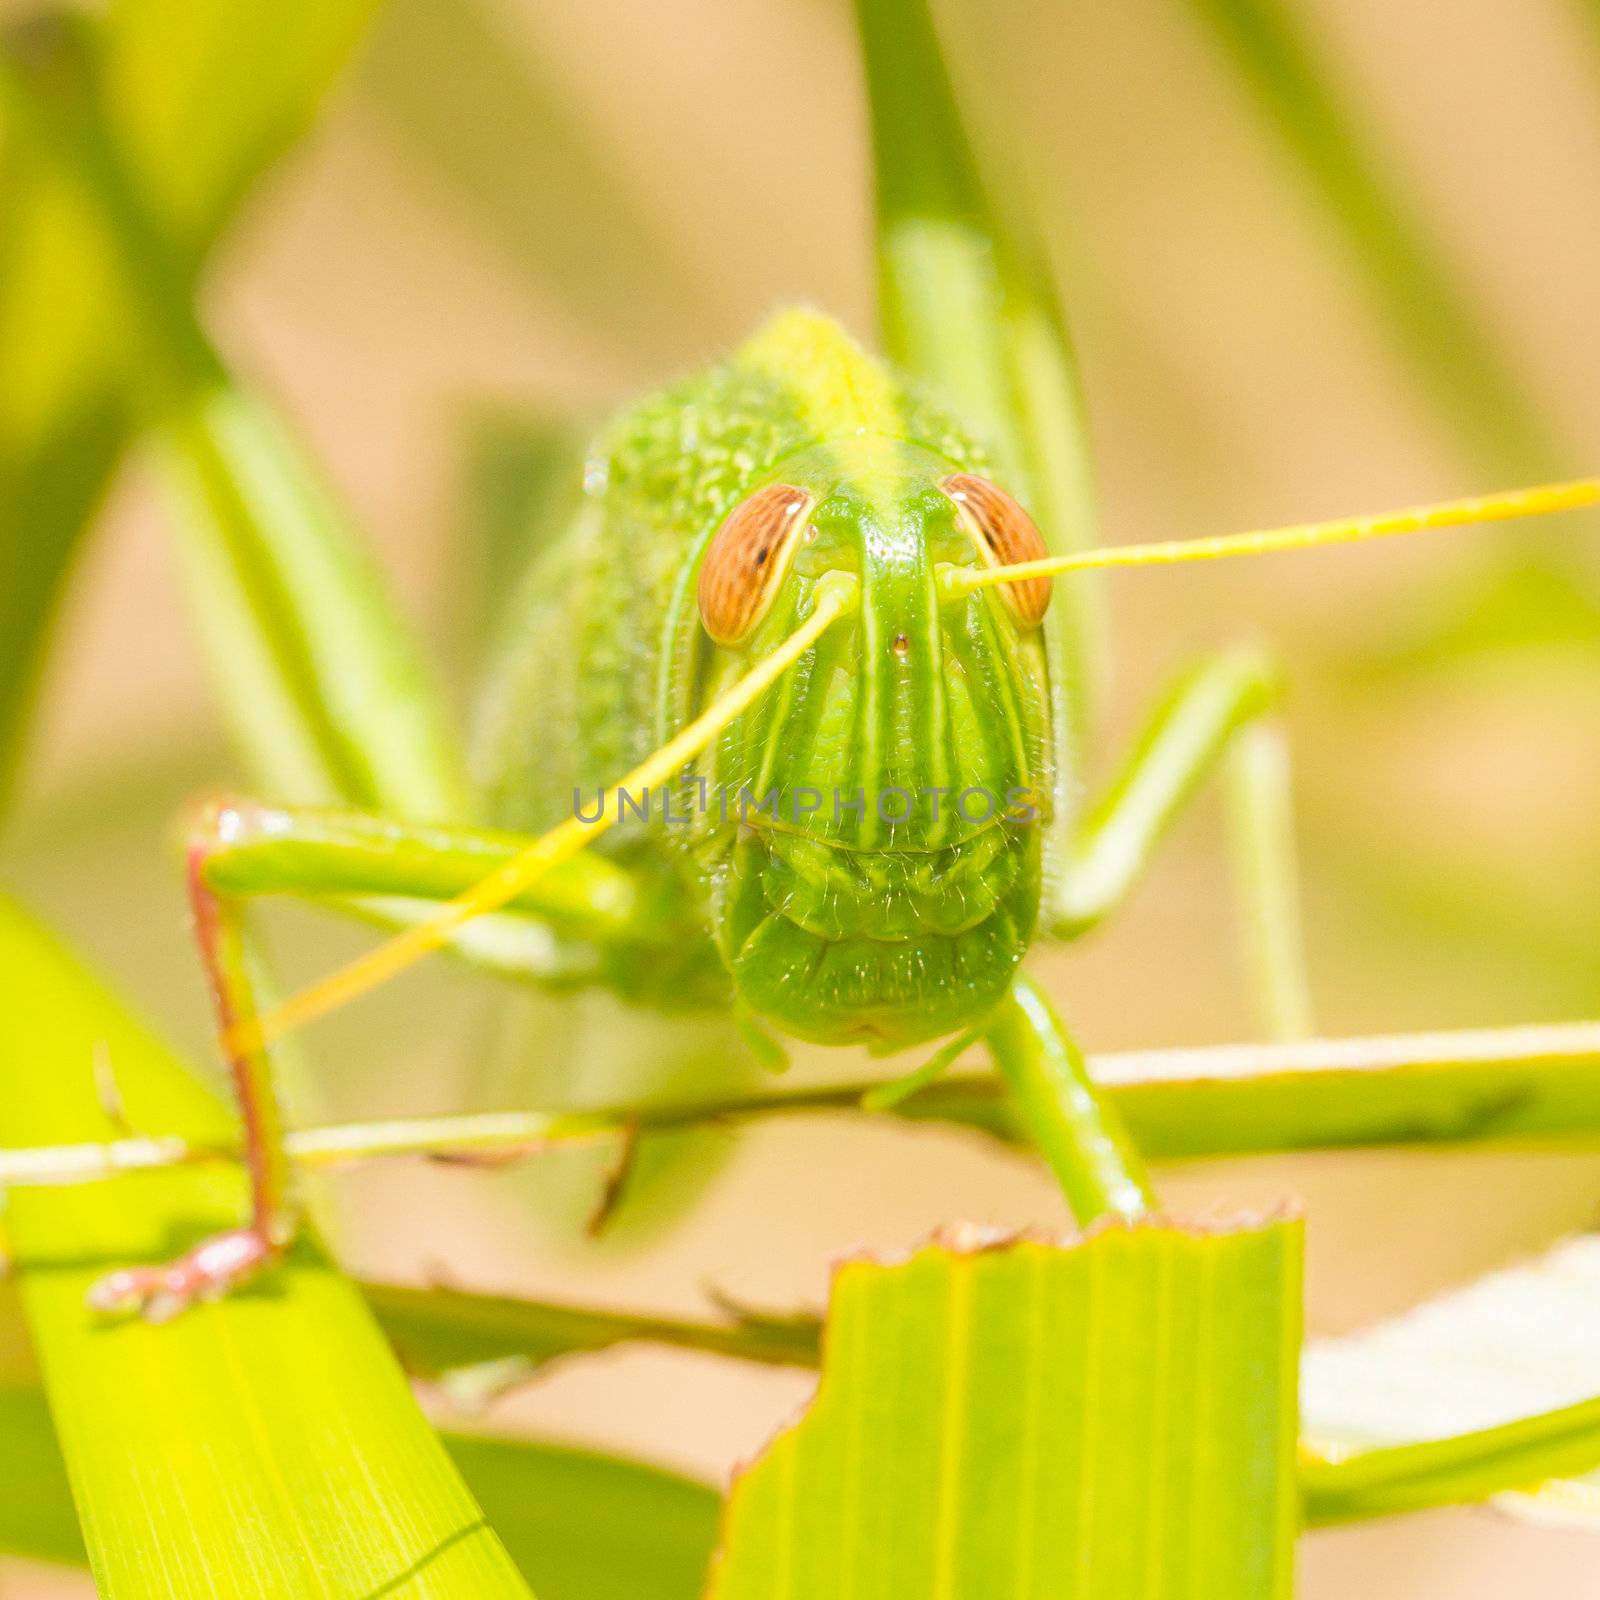 Large grasshopper, eating grass by michaklootwijk